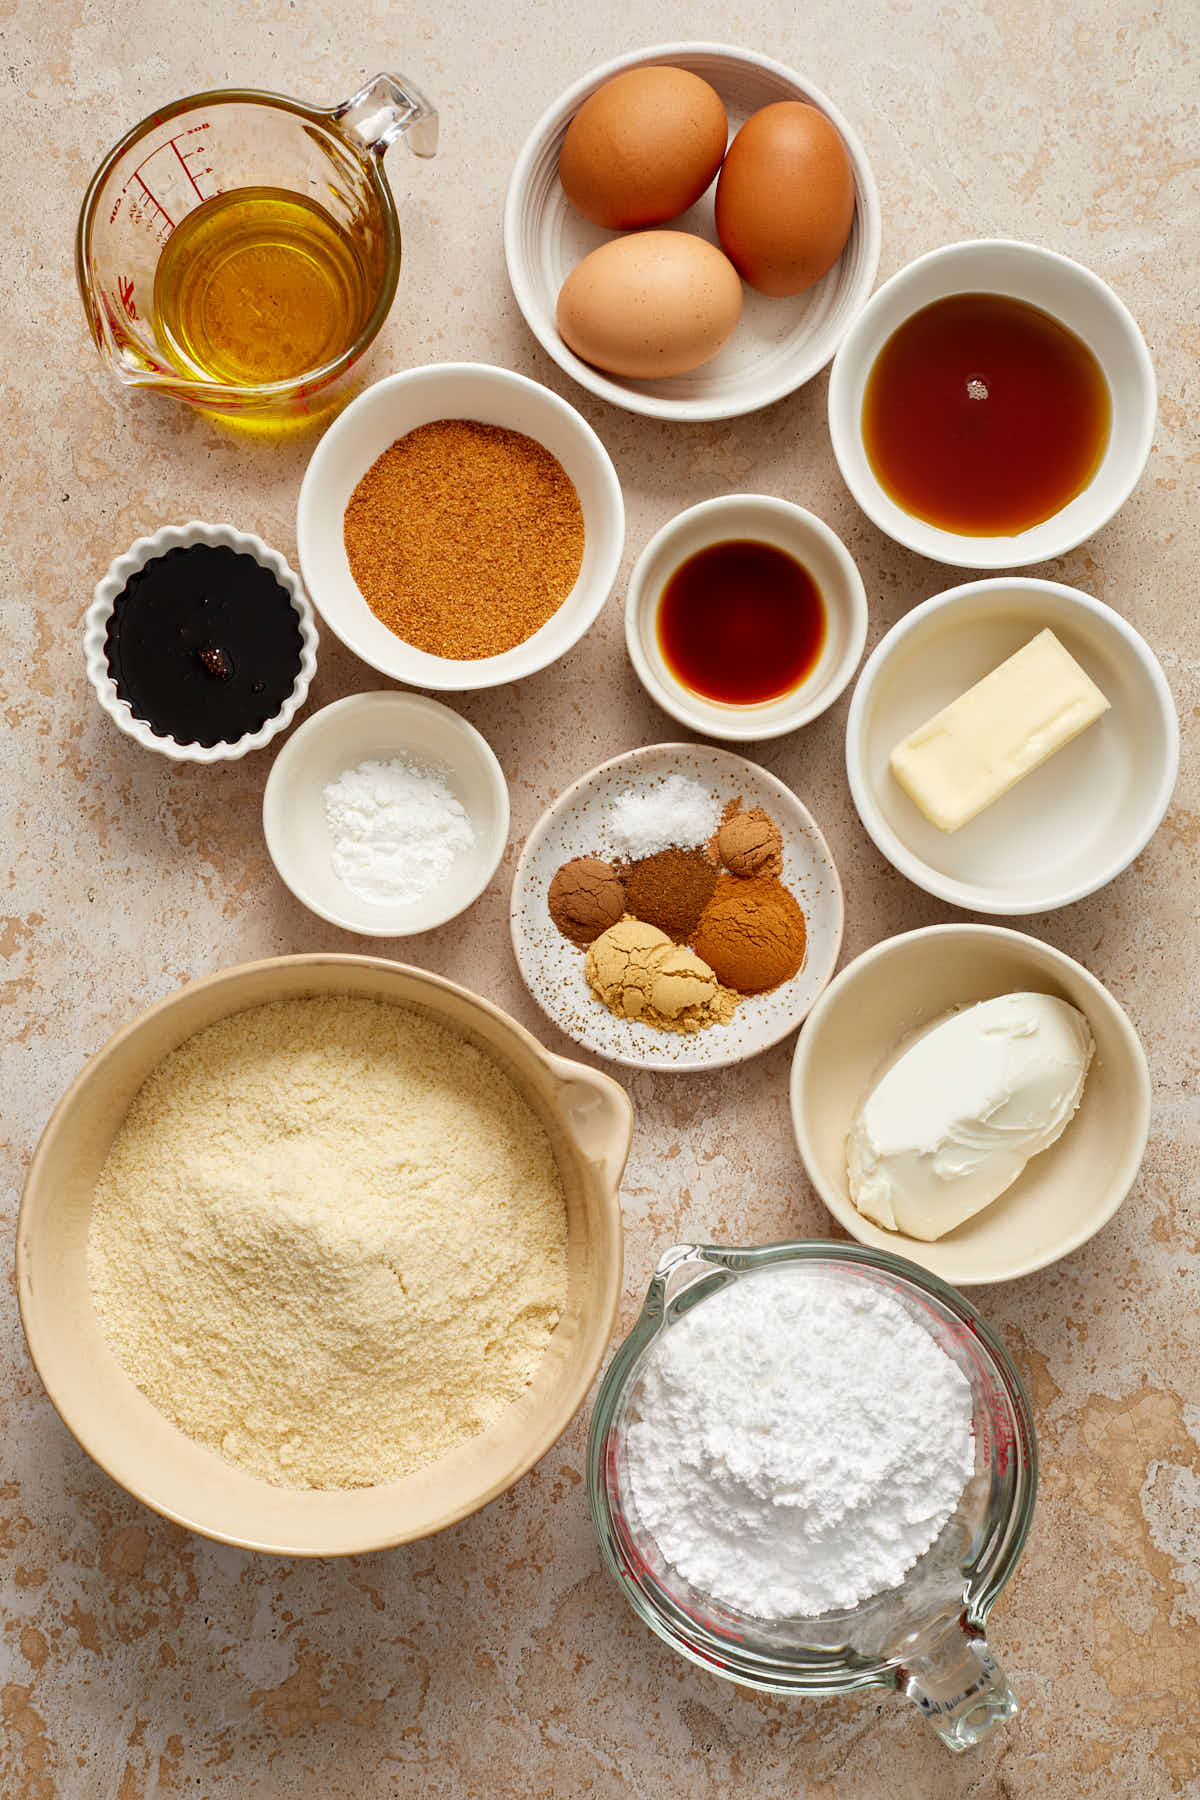 Ingredients to make almond flour gingerbread cake arranged in individual dishes.